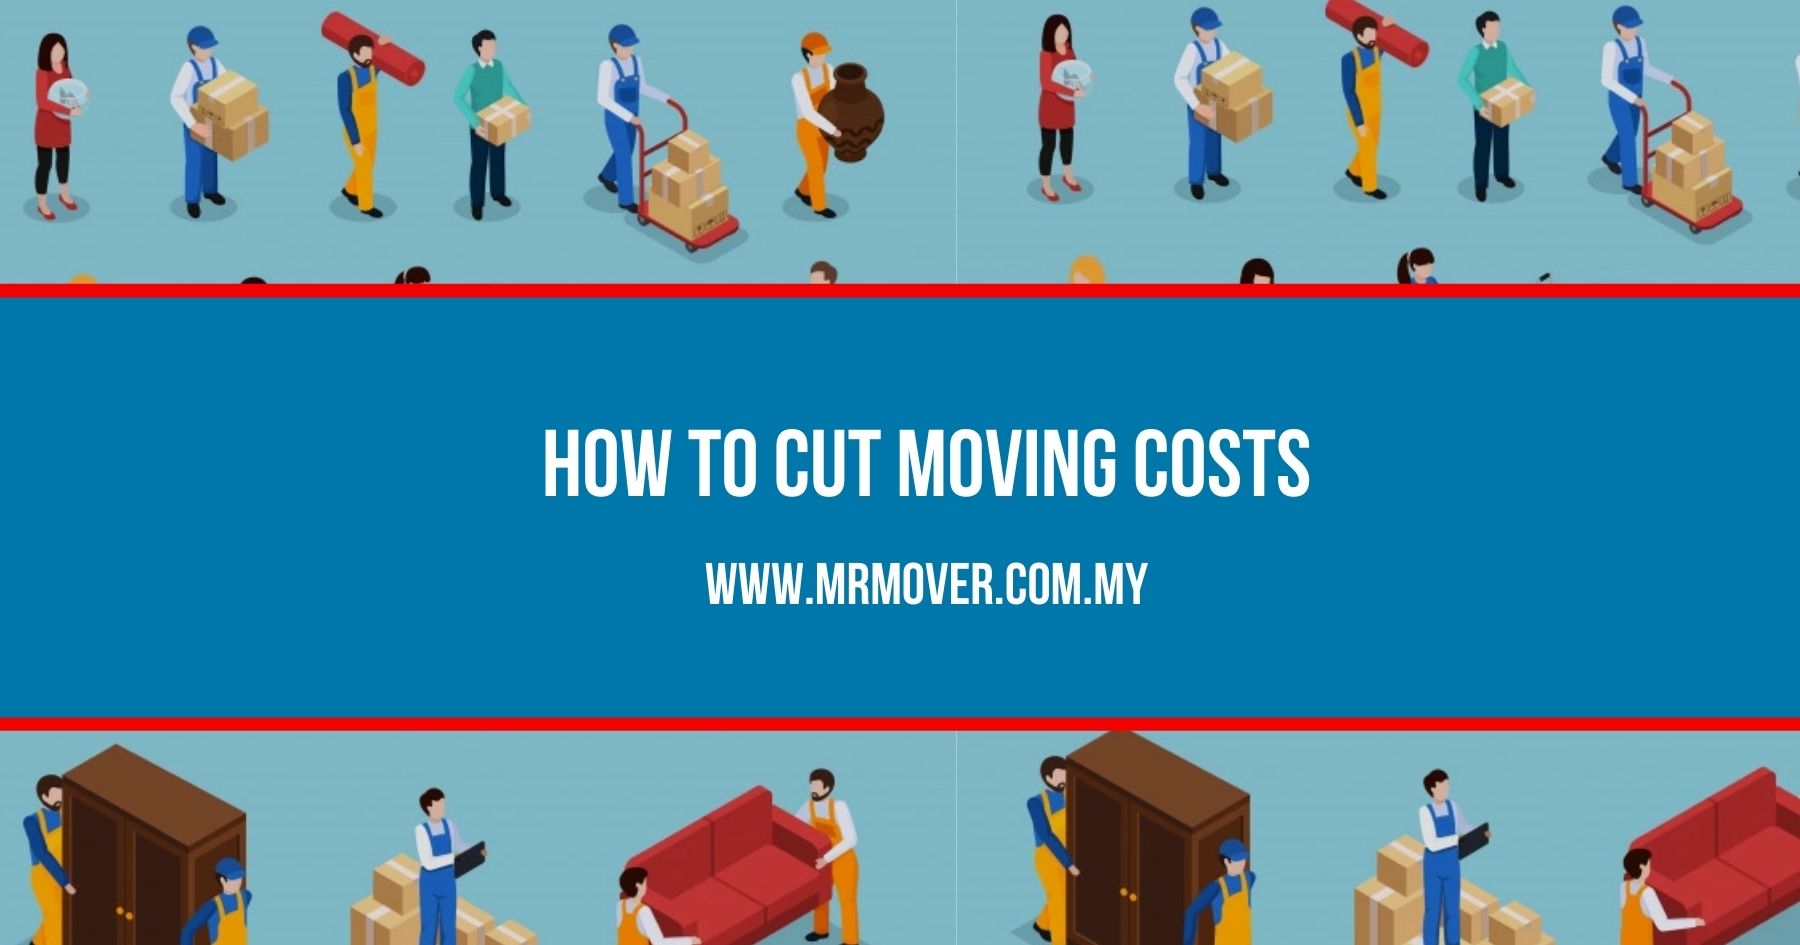 How to Cut Moving Costs